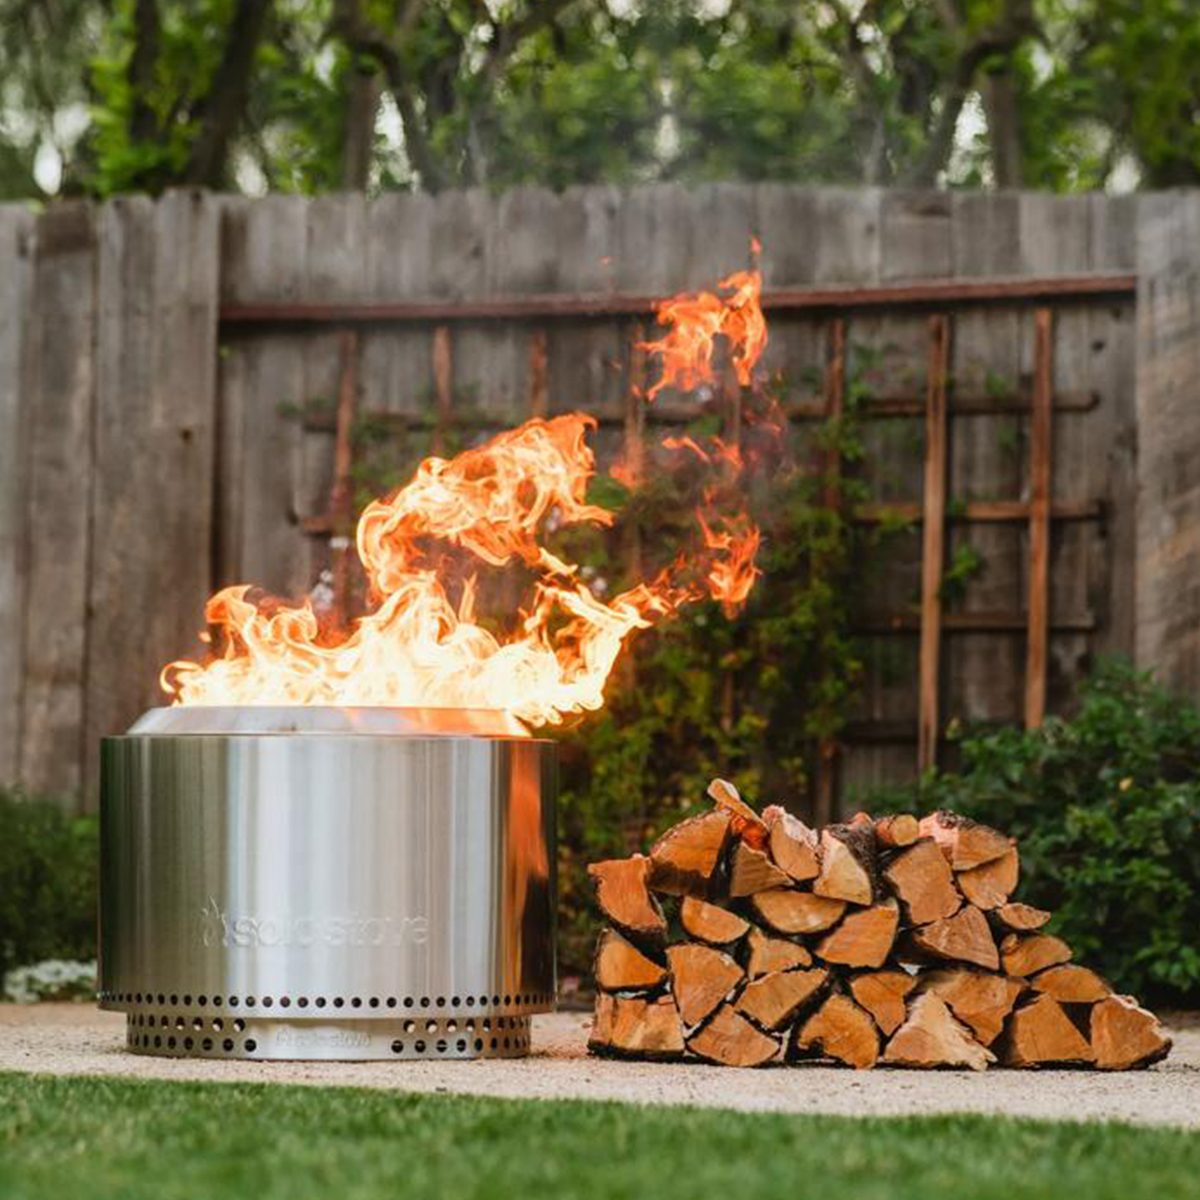 https://www.familyhandyman.com/wp-content/uploads/2023/11/These-Are-the-Best-Fire-Pit-Sales-of-Fall%E2%80%94Solo-Stove-East-Oak-and-More_FT_via-amazon.com_.jpg